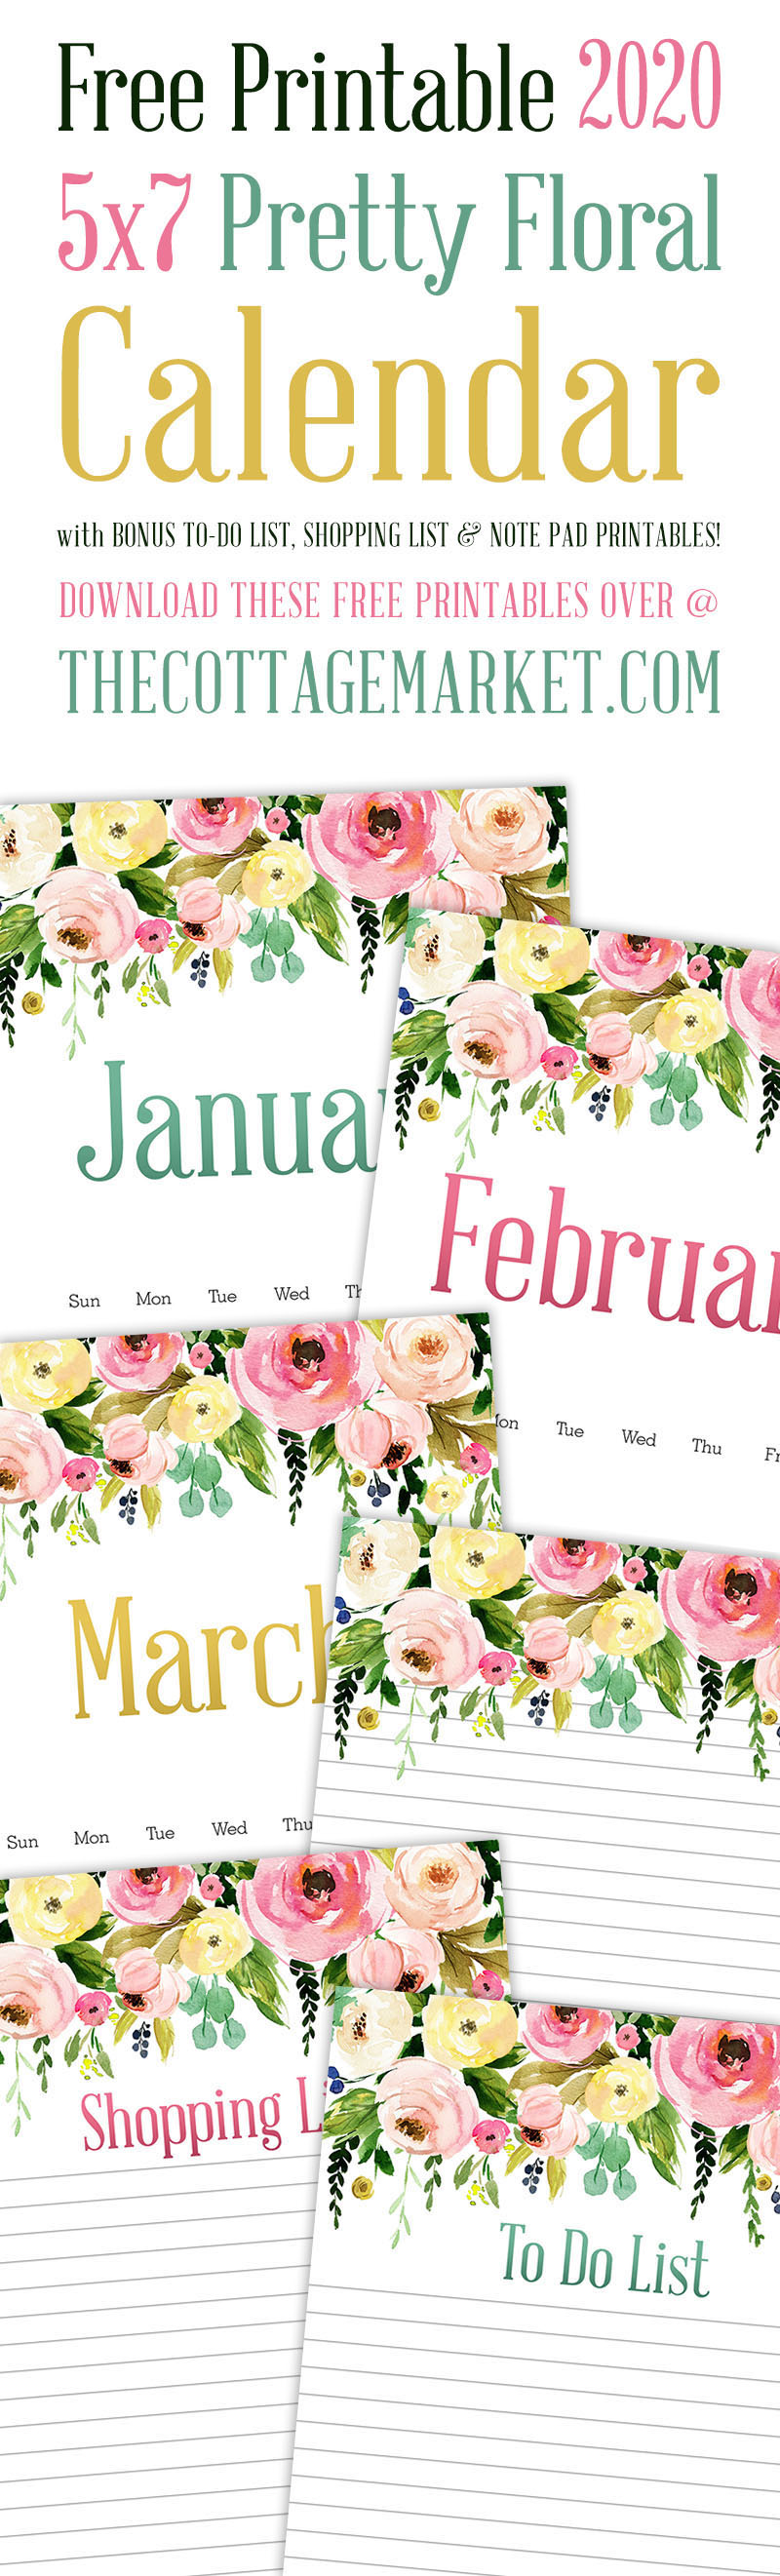 This Free Printable 2020 5X7 Pretty Floral Calendar is just what you need this upcoming year to stay organized.  You get a 12 Page Calendar, Note Page, To Do List and Shopping List!  ENJOY!